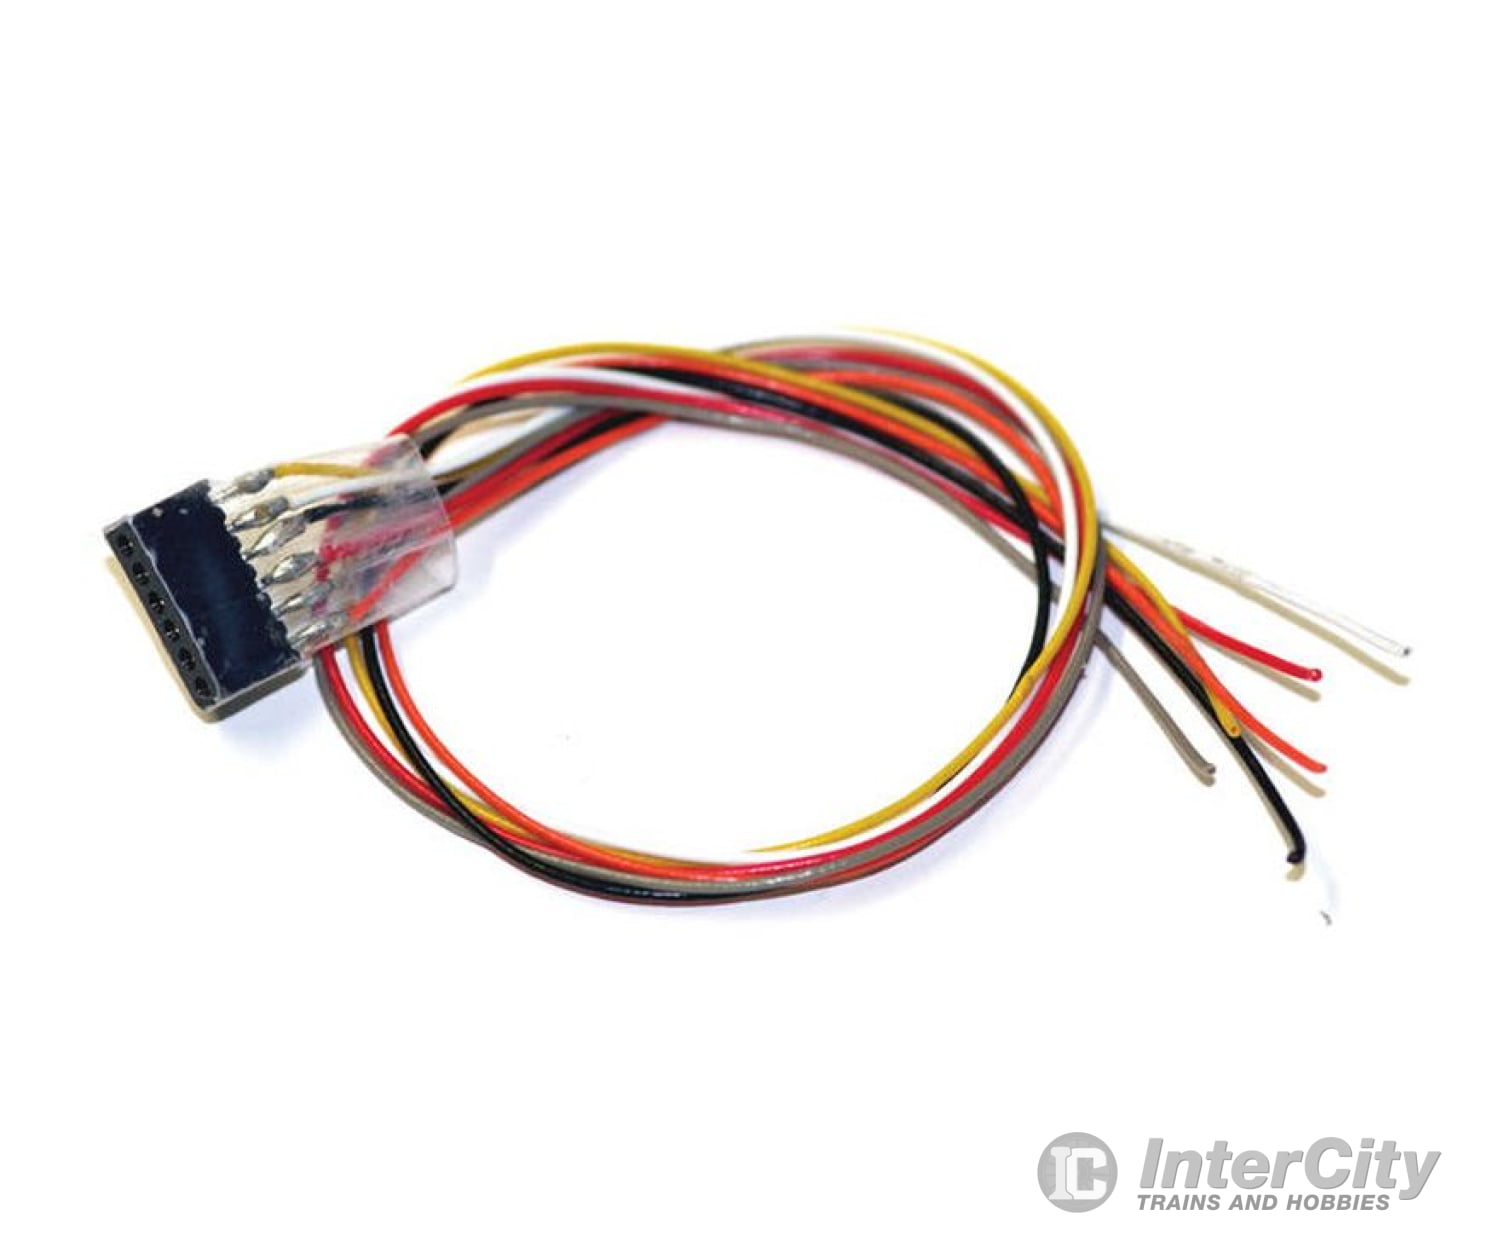 Esu 51951 Dcc Decoder Cable Harness With Nem651 6 - Pin Socket - - 11 - 13/16’ 30Cm Leads